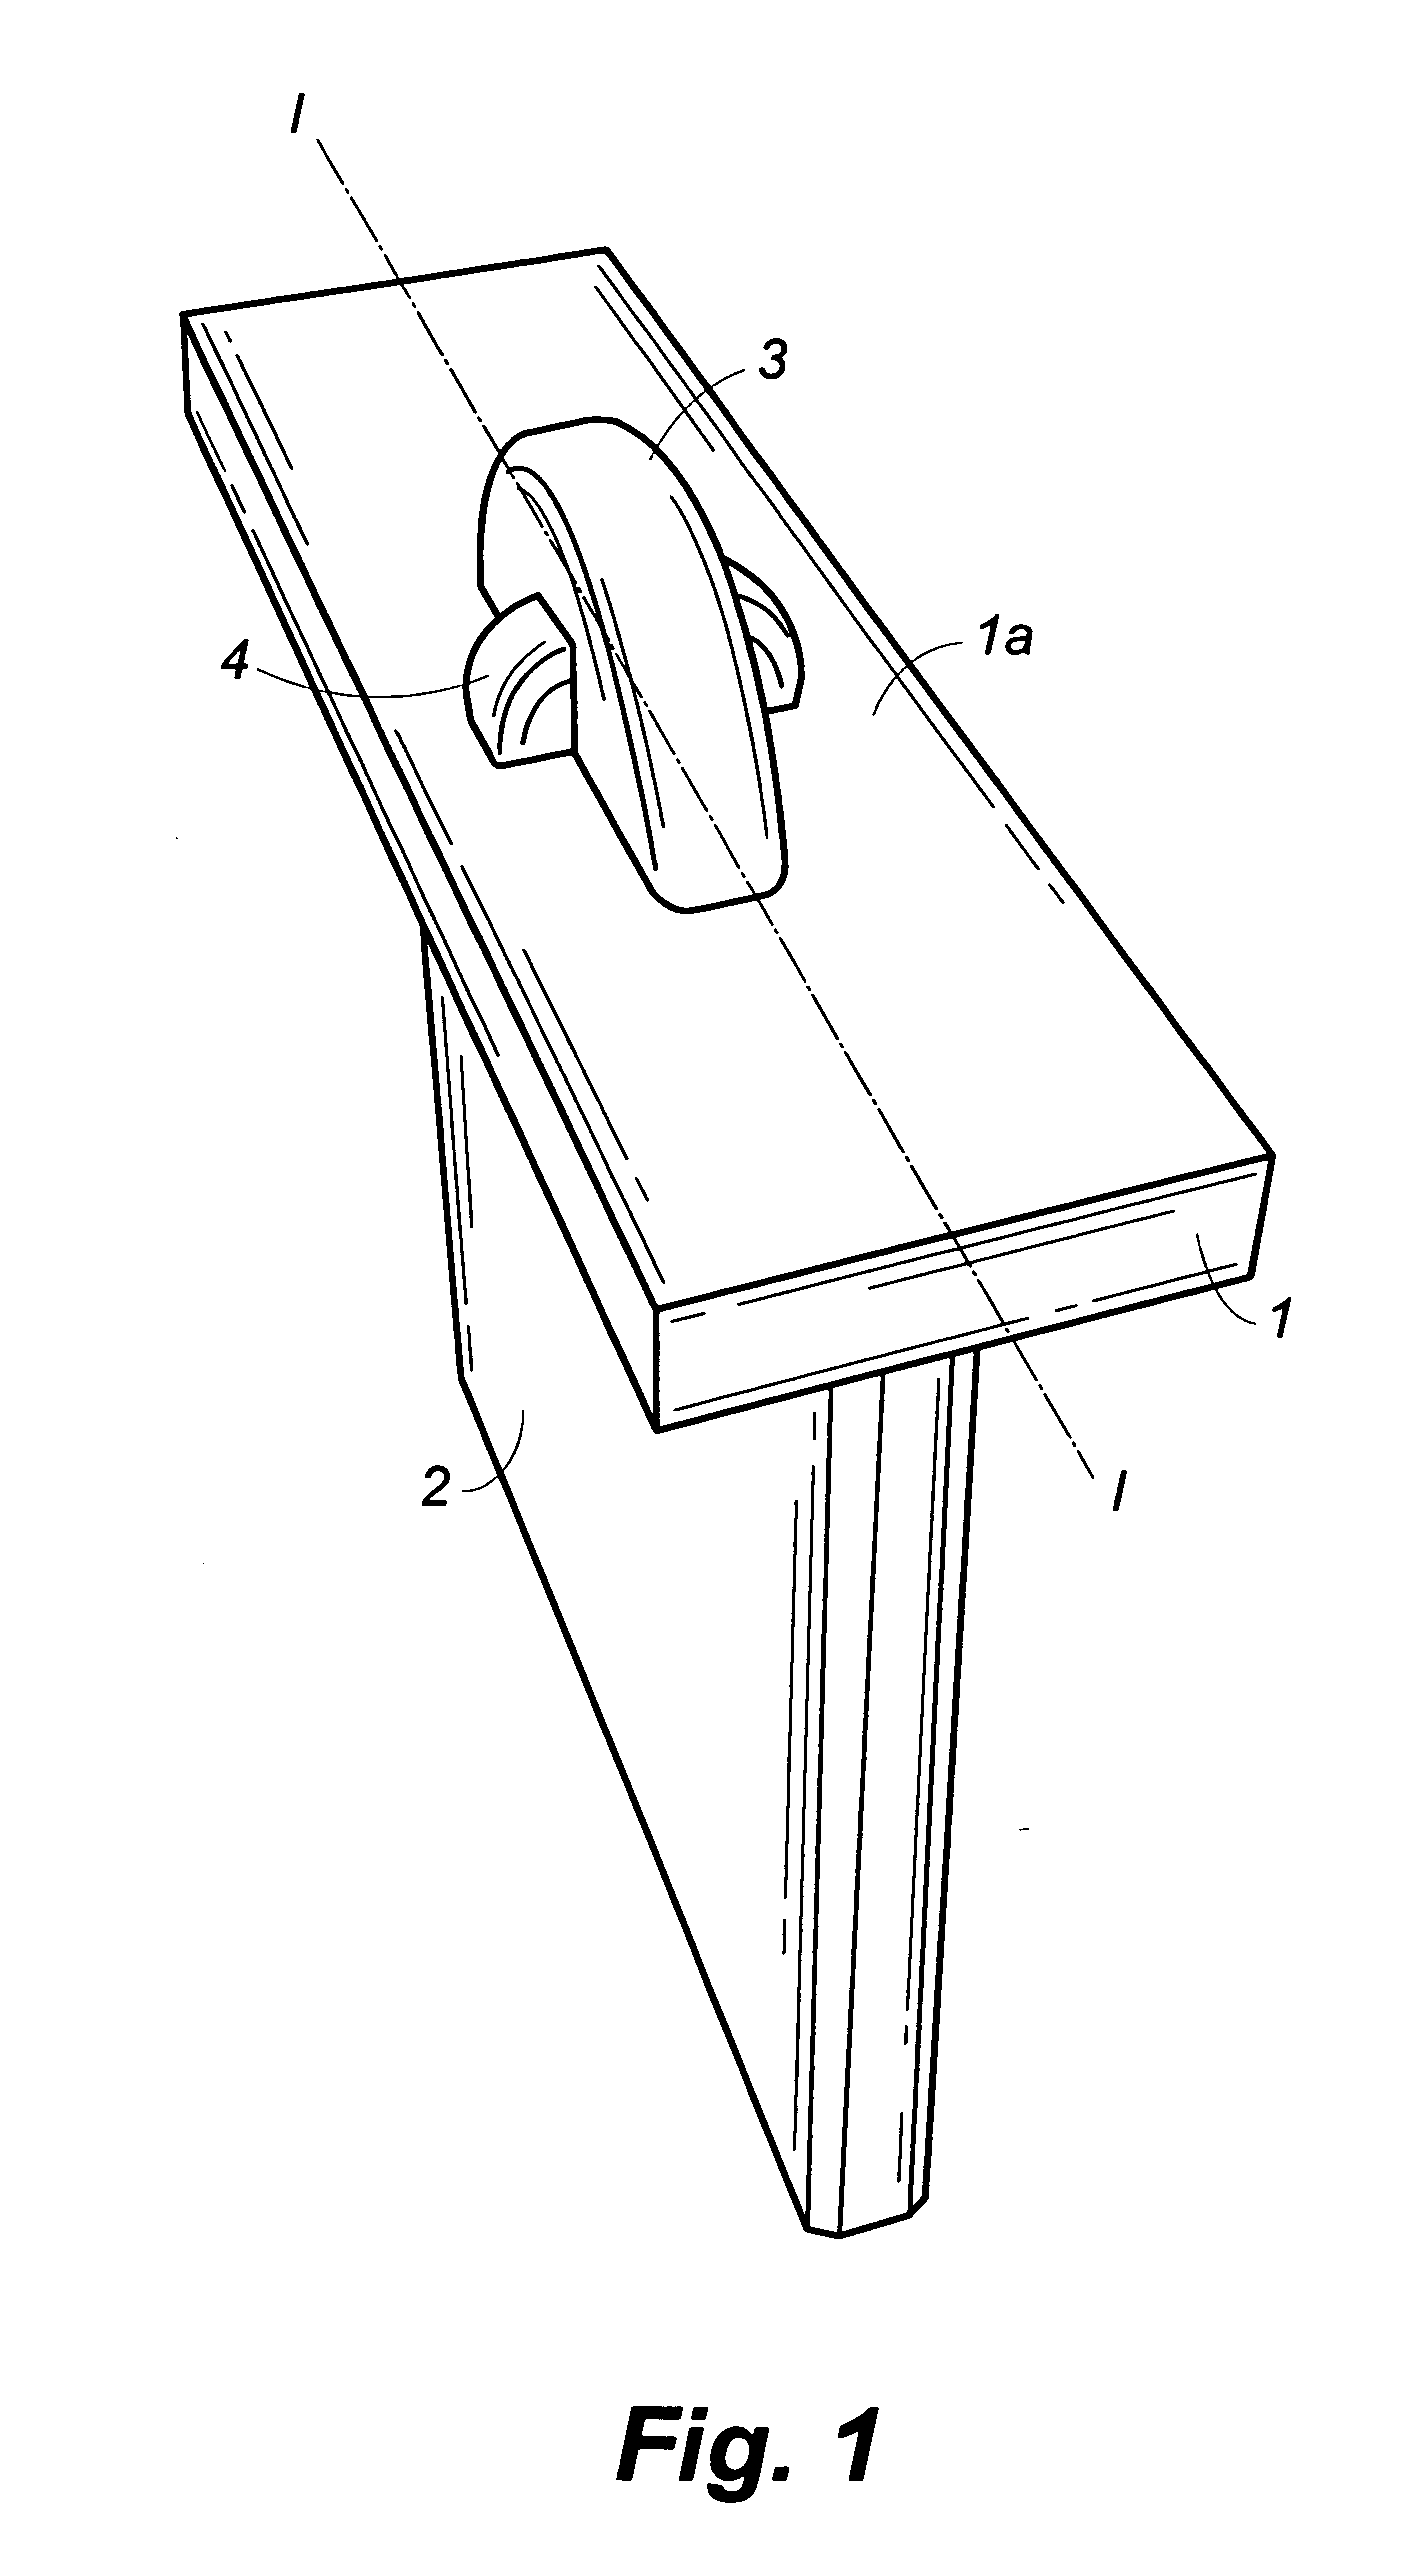 Method for forming a mortise and tenon for tool free joinder, and joint assembled therefrom